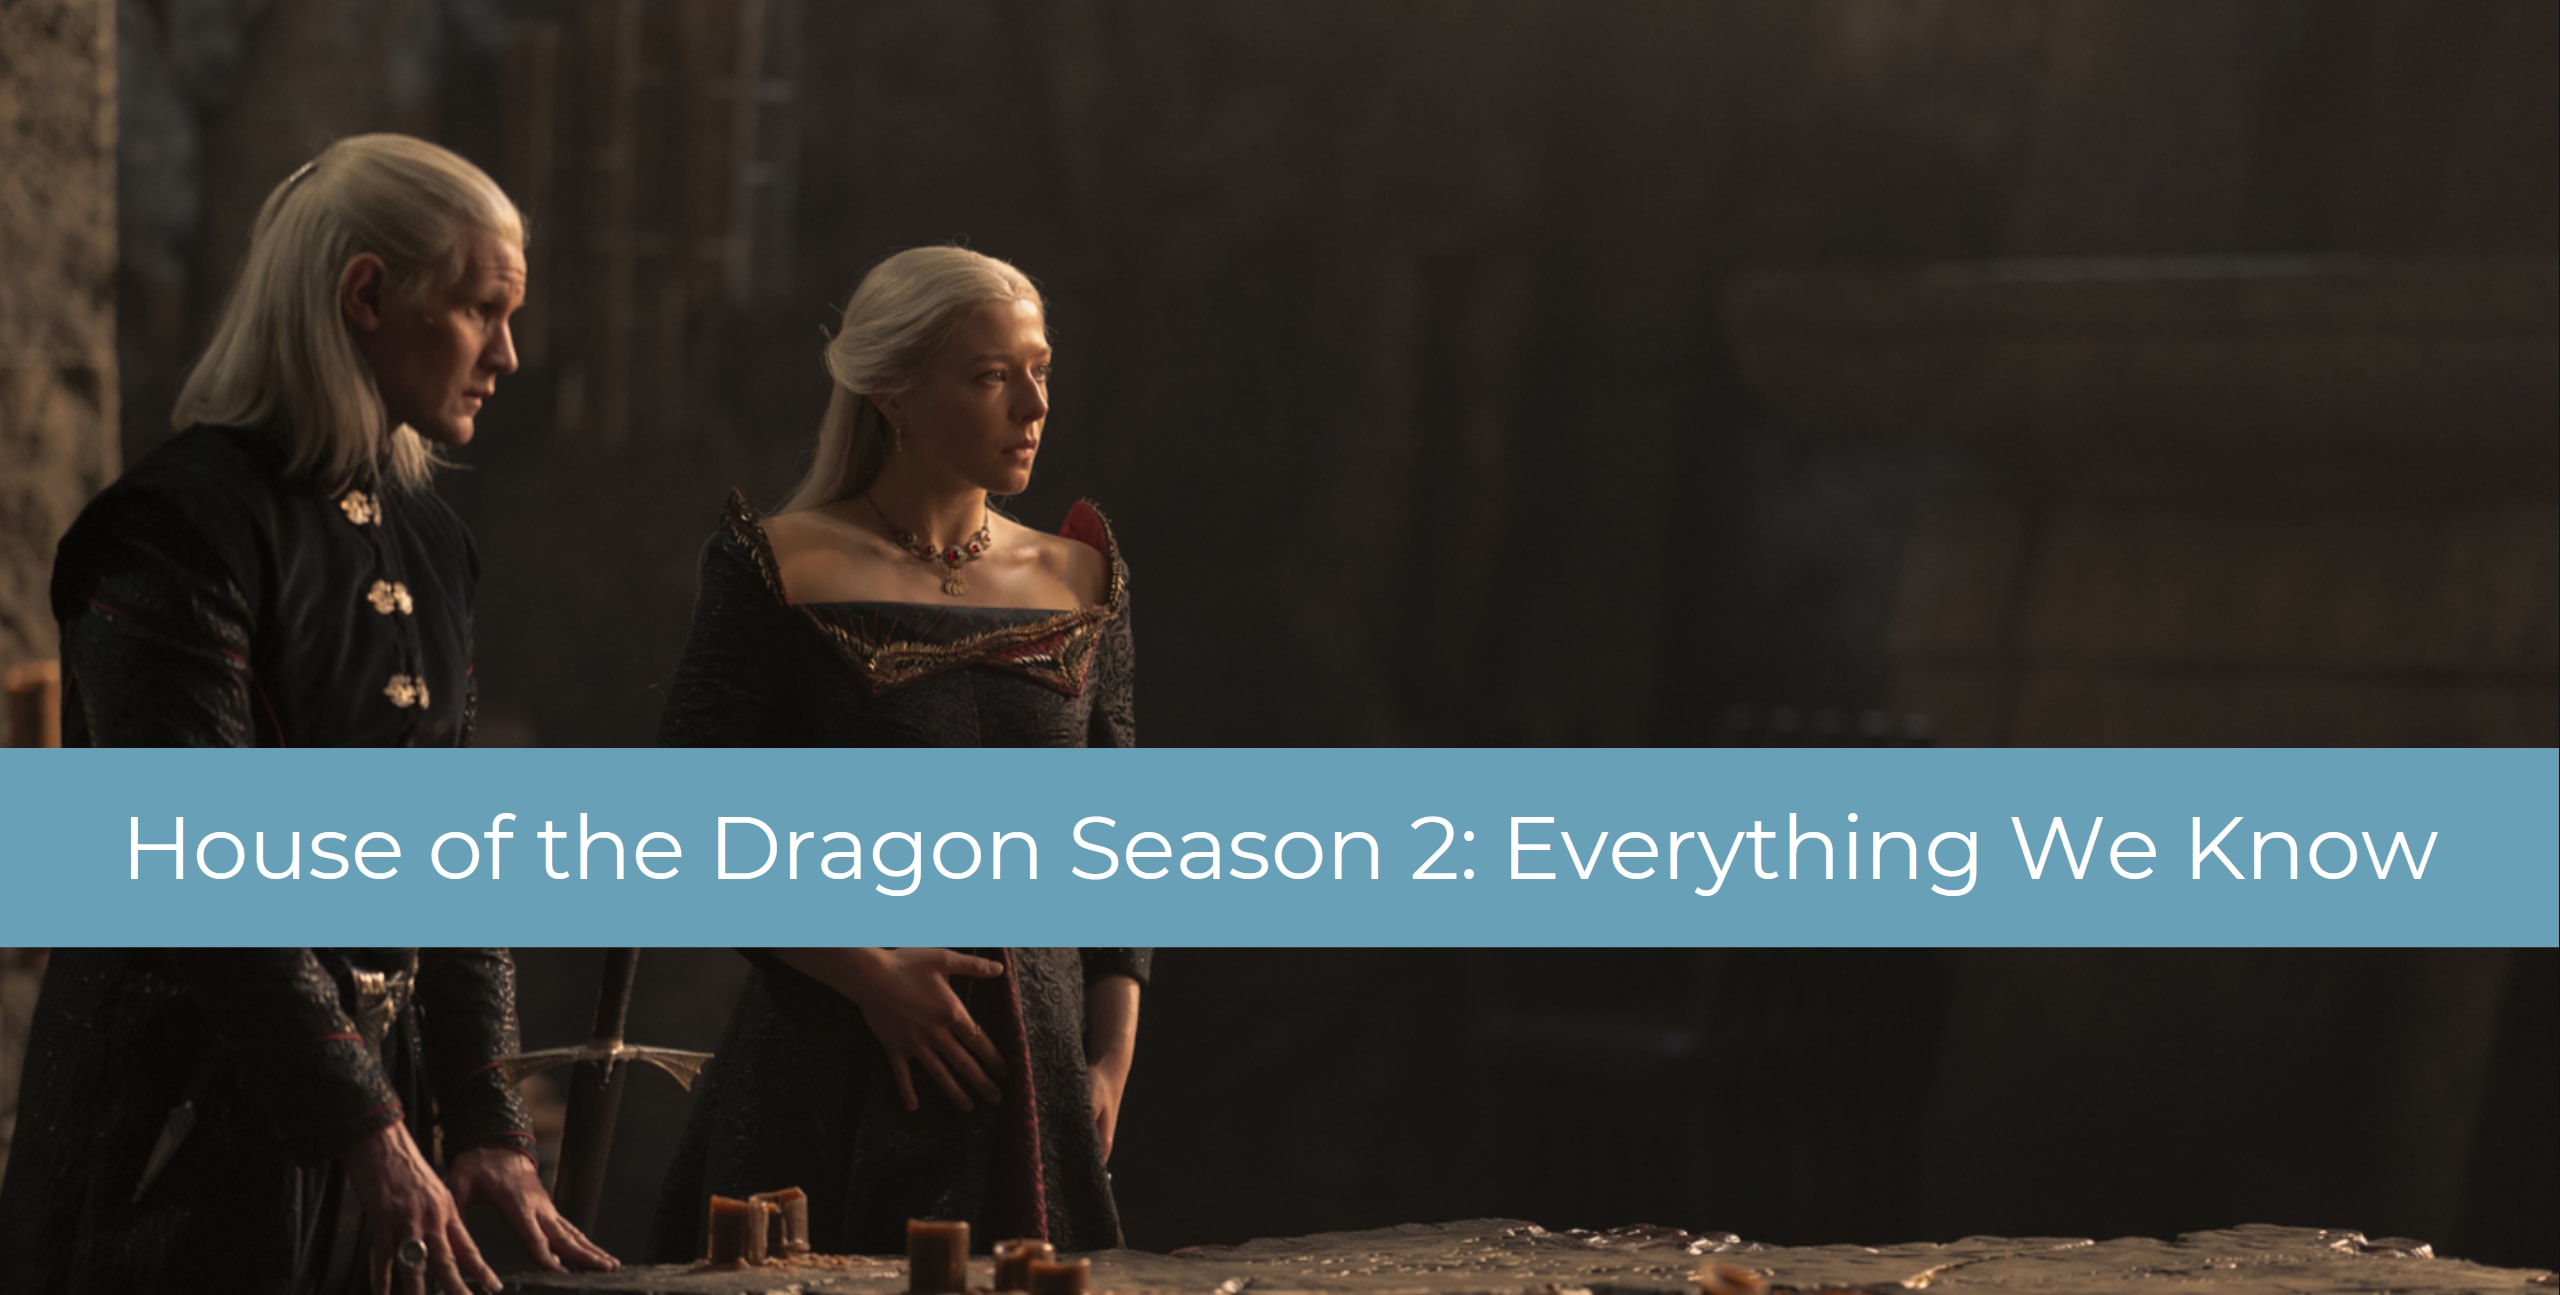 House of the Dragon' Season 2: Everything to Know